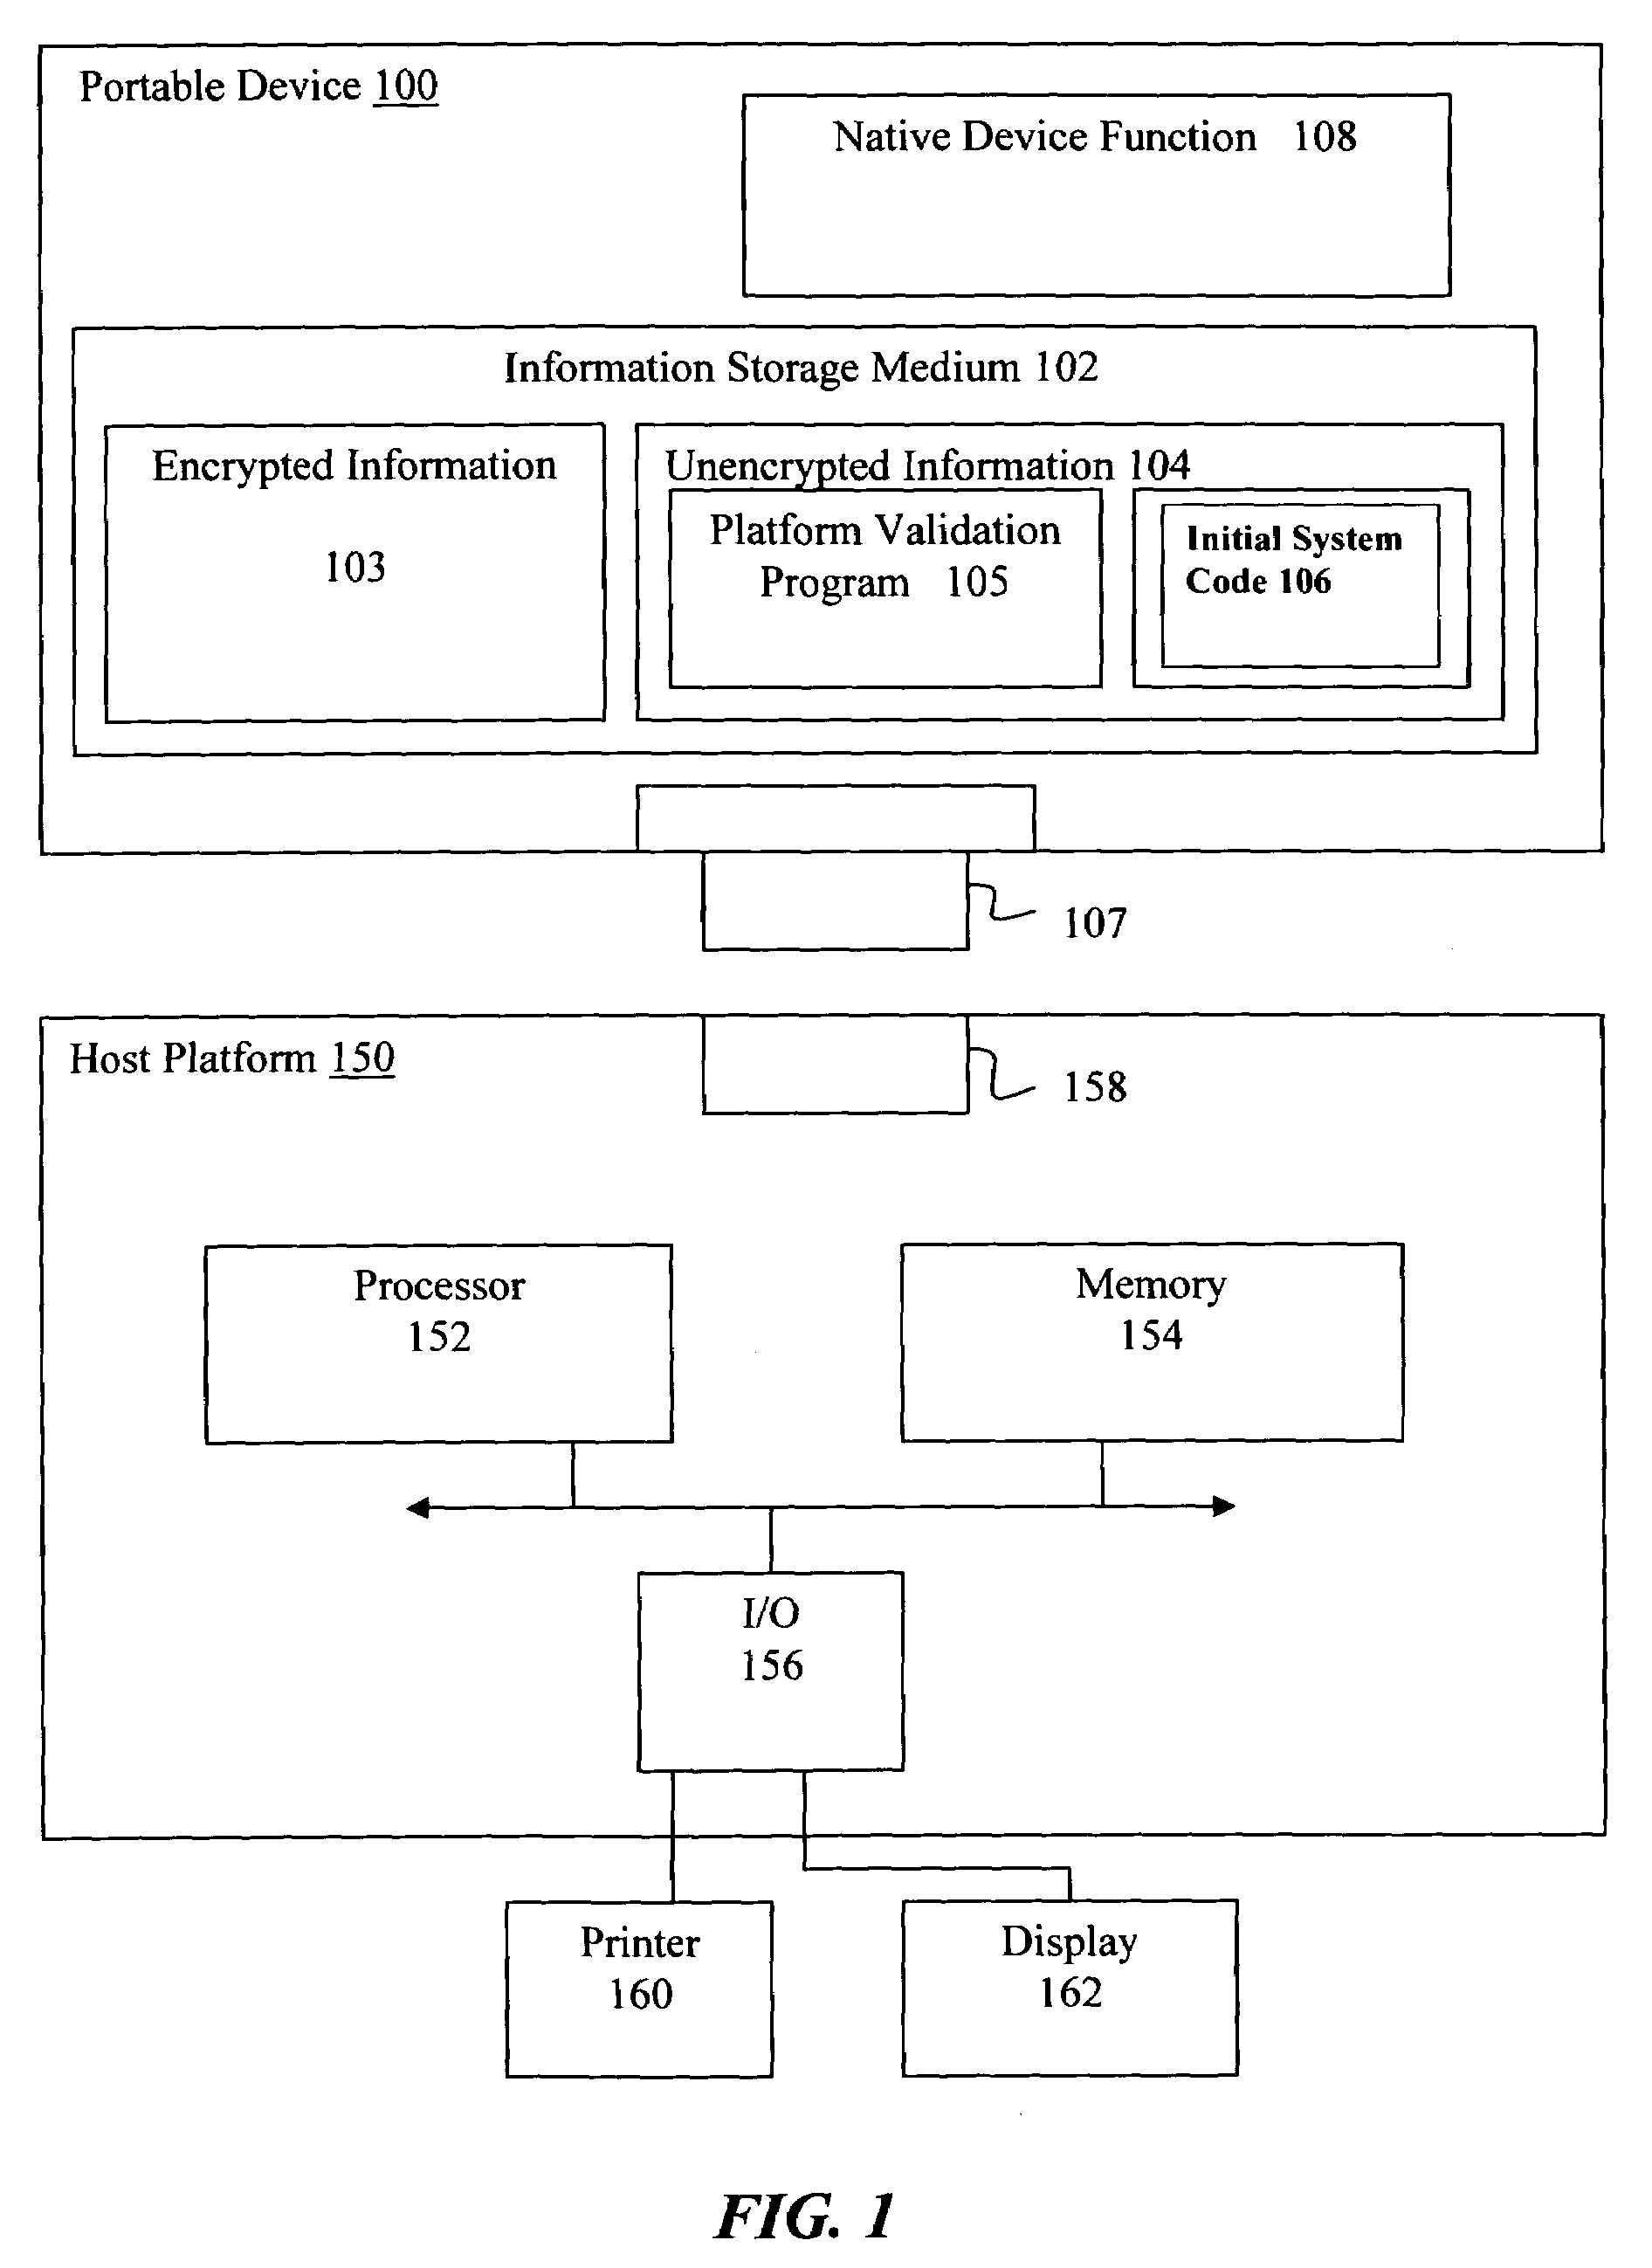 System and method for validating a computer platform when booting from an external device